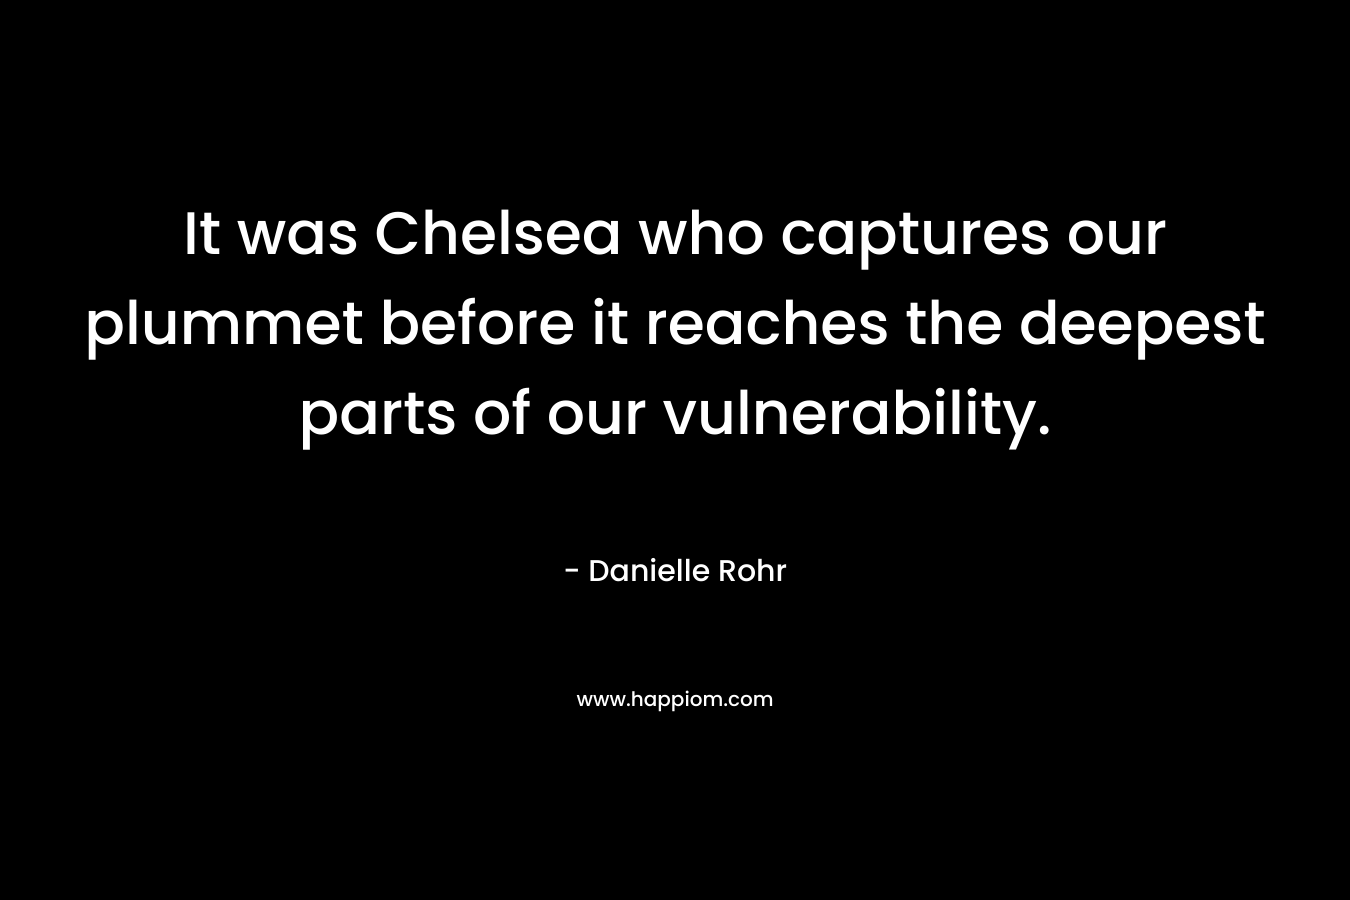 It was Chelsea who captures our plummet before it reaches the deepest parts of our vulnerability.